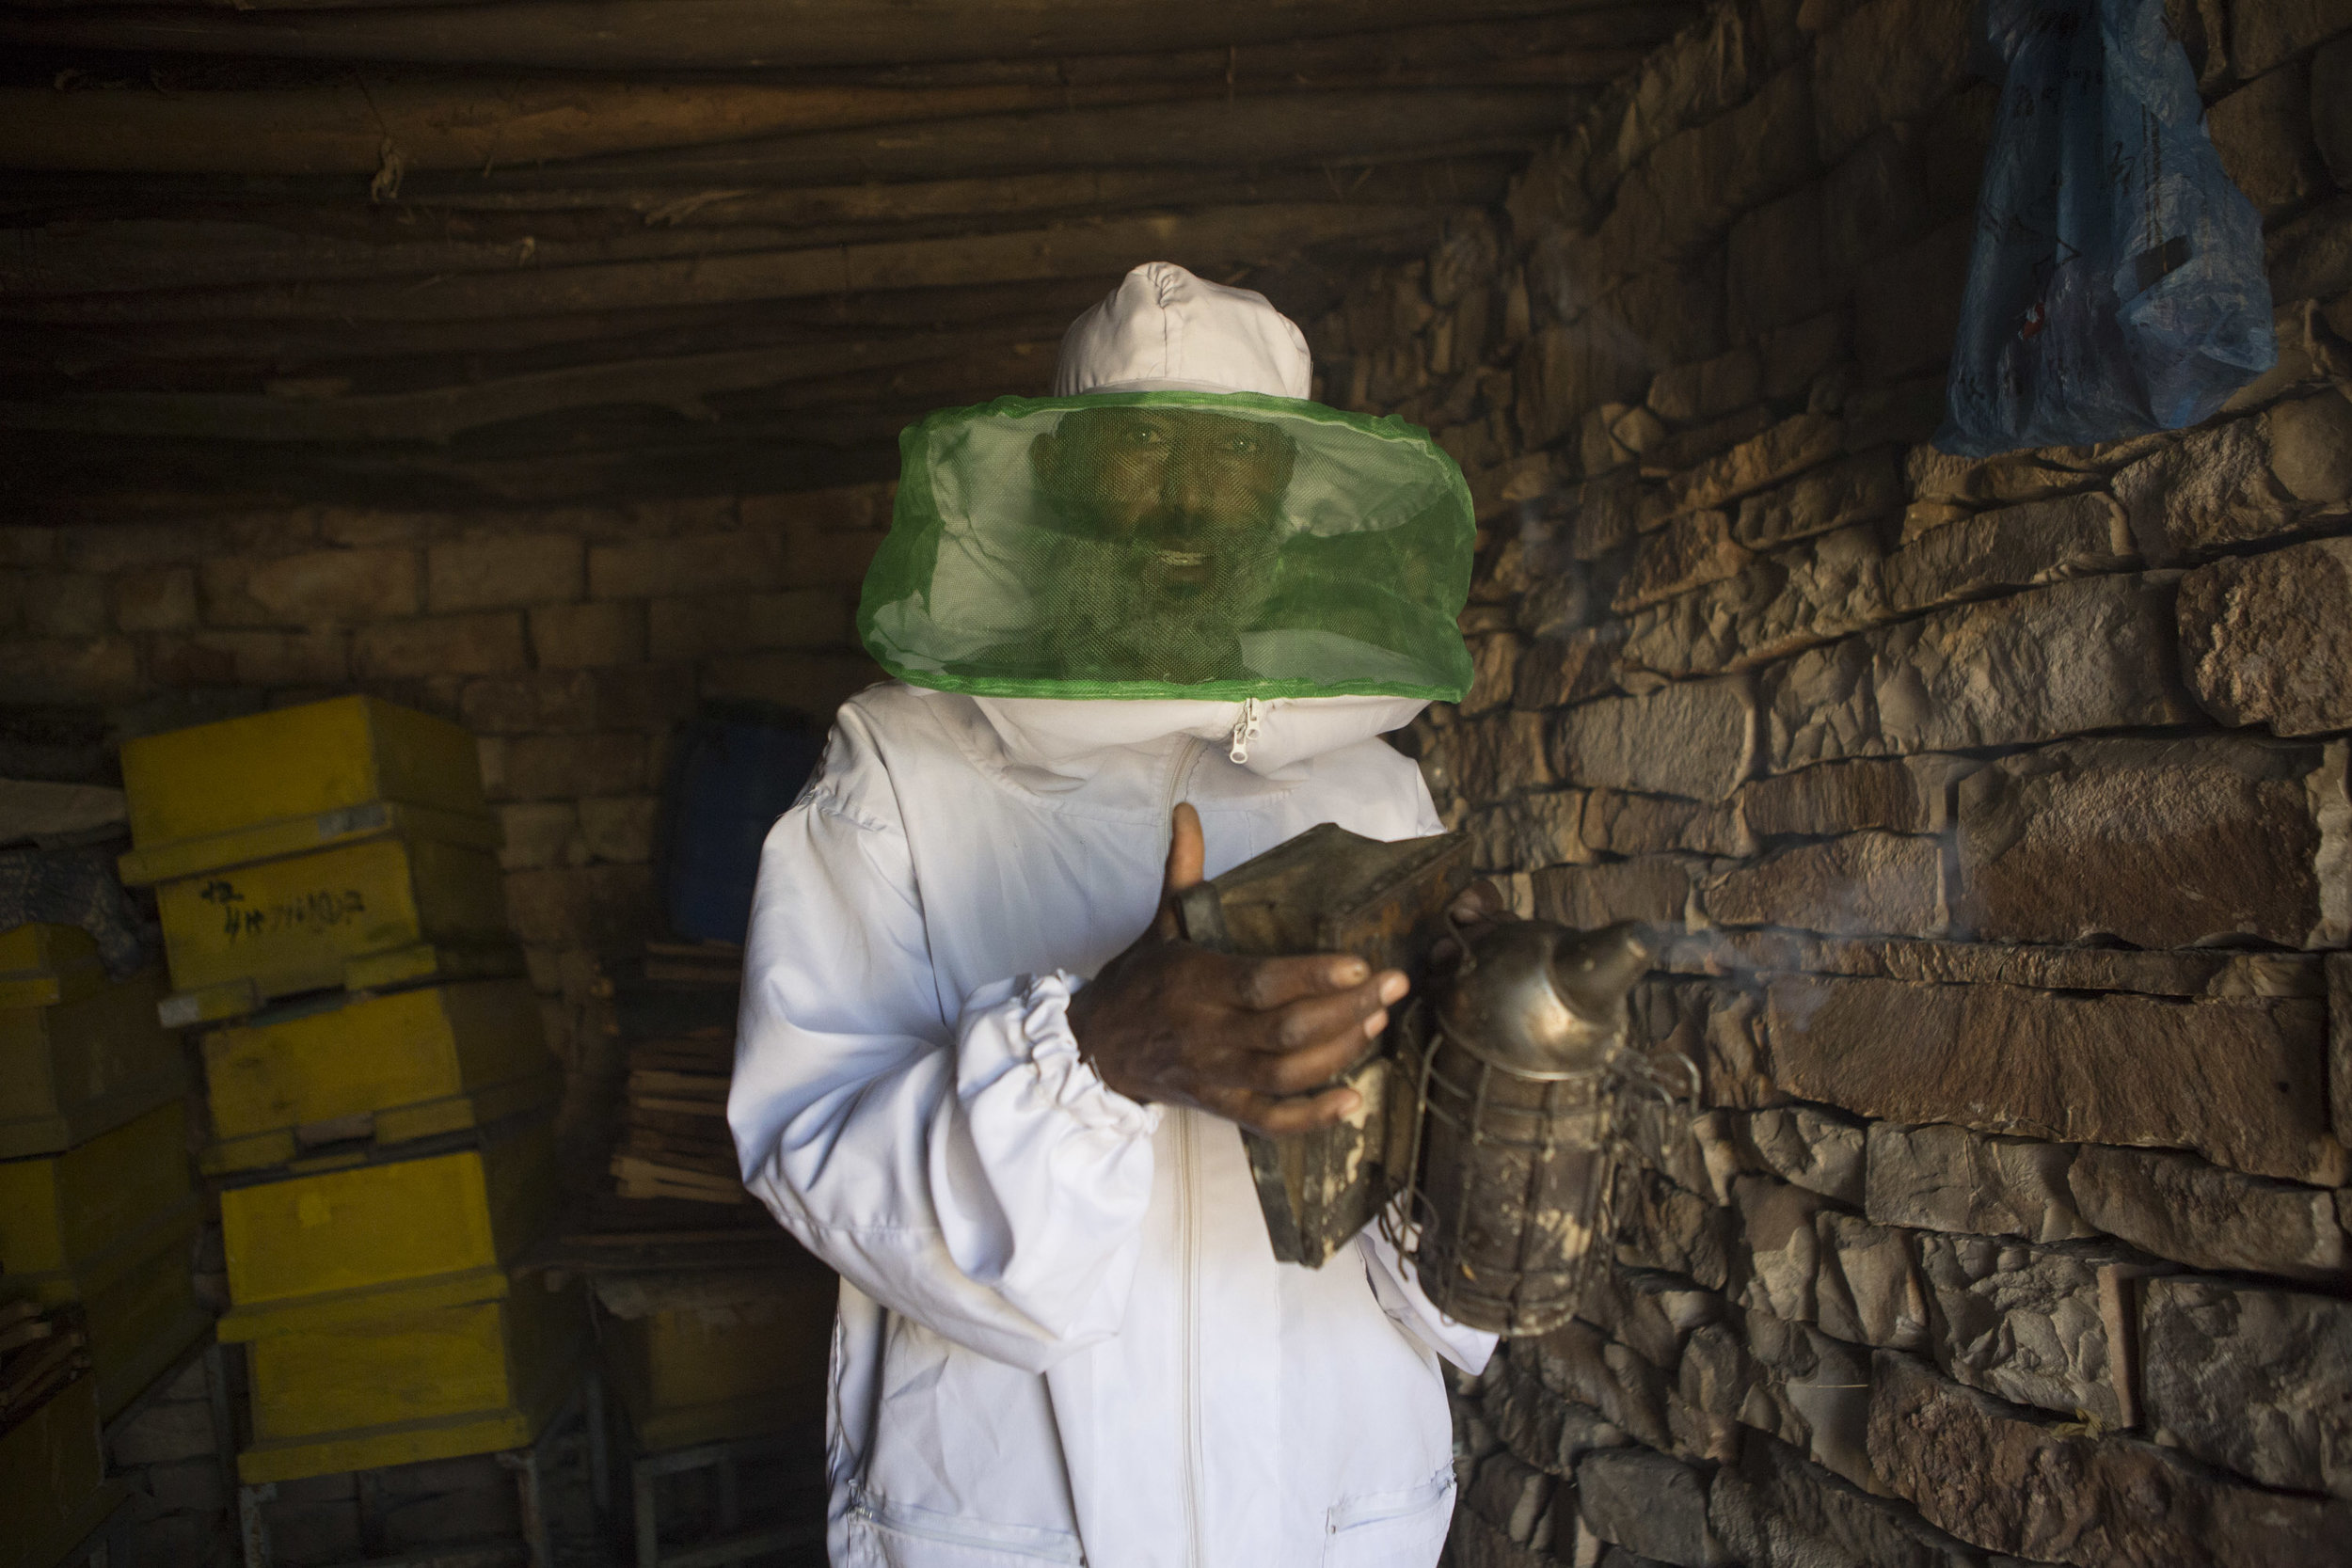  lem Abreha, honey farmer, pictured preparing a beehive smoker on his honey farm outside of Wukro in the Tigray region of northern Ethiopia on 29 March 2017. Abreha has four farms in the locality outside of Wukro, he has had training in different pla